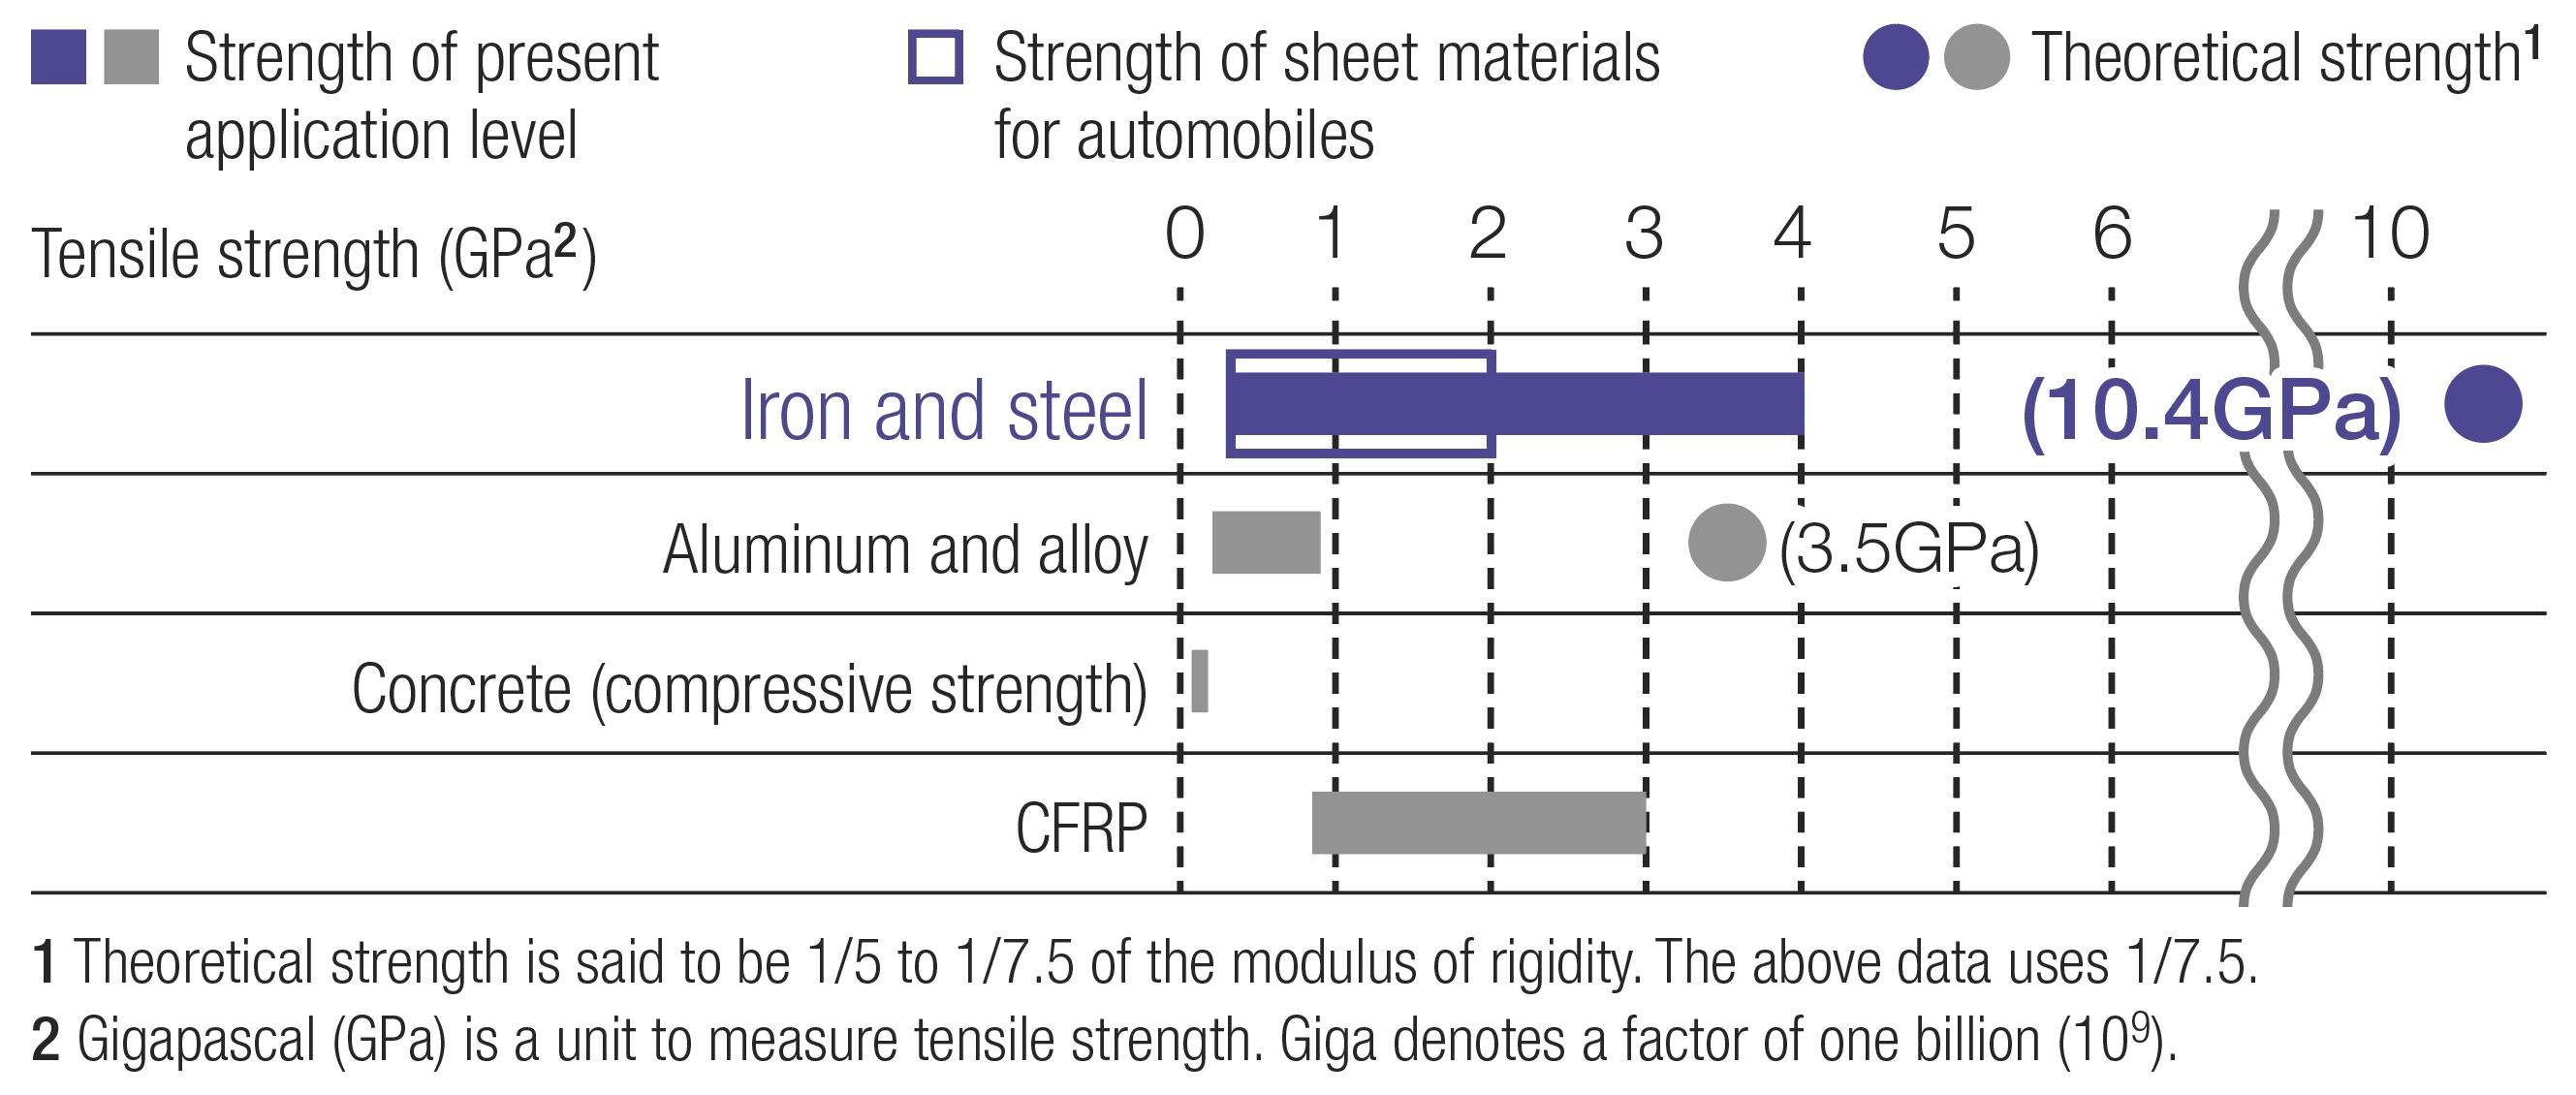 Potential capacity and present application level of material strength